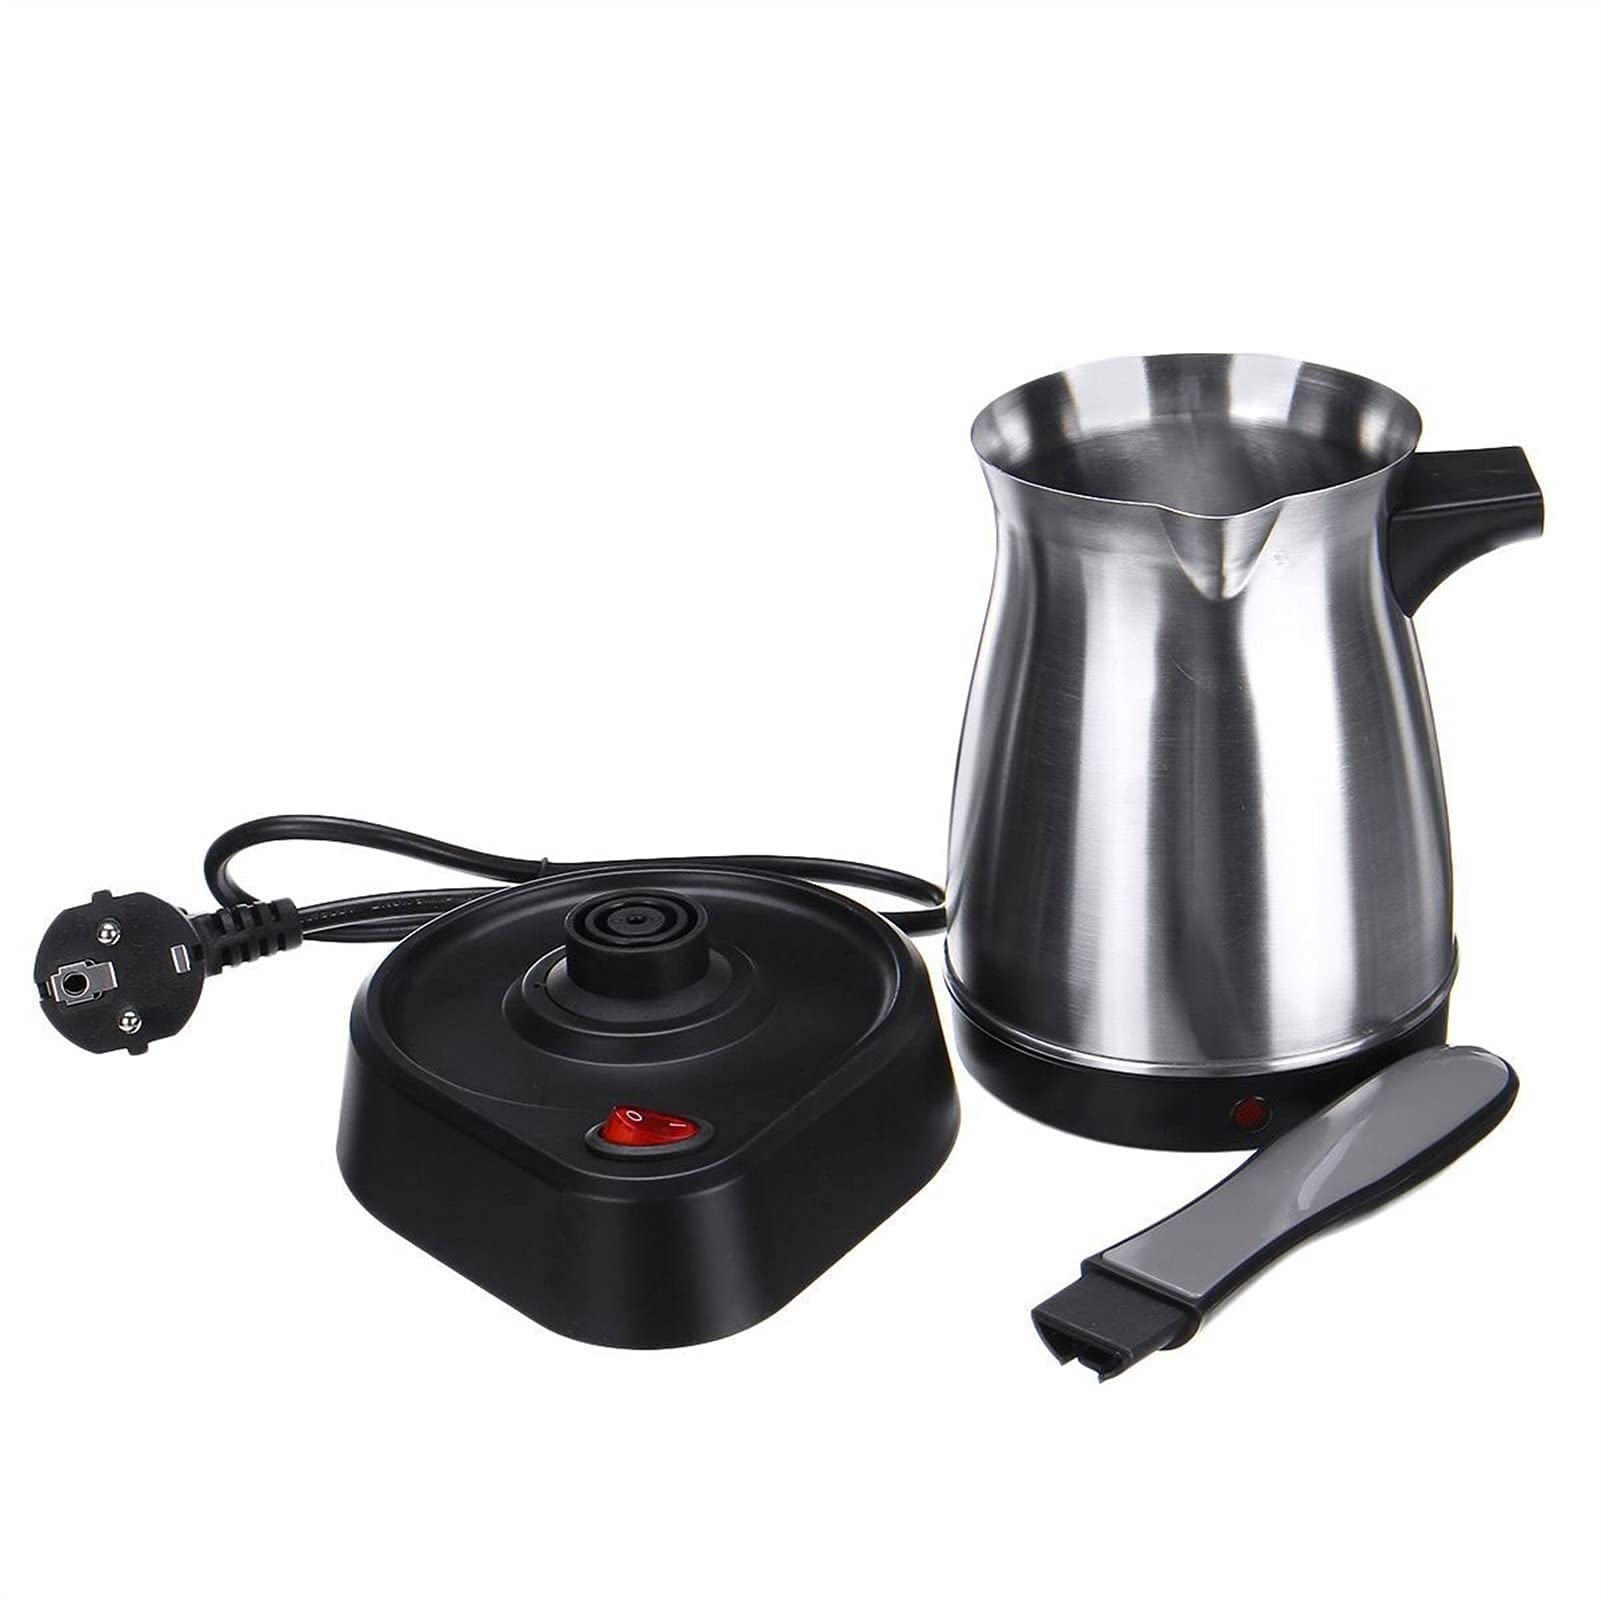 VIO Electric Hot Water Kettle 500ml Stainless Steel Coffee Machine Greek Turkish Coffee Maker Portable Waterproof Electric Hot Boiled Pot Home Portable Tea Maker